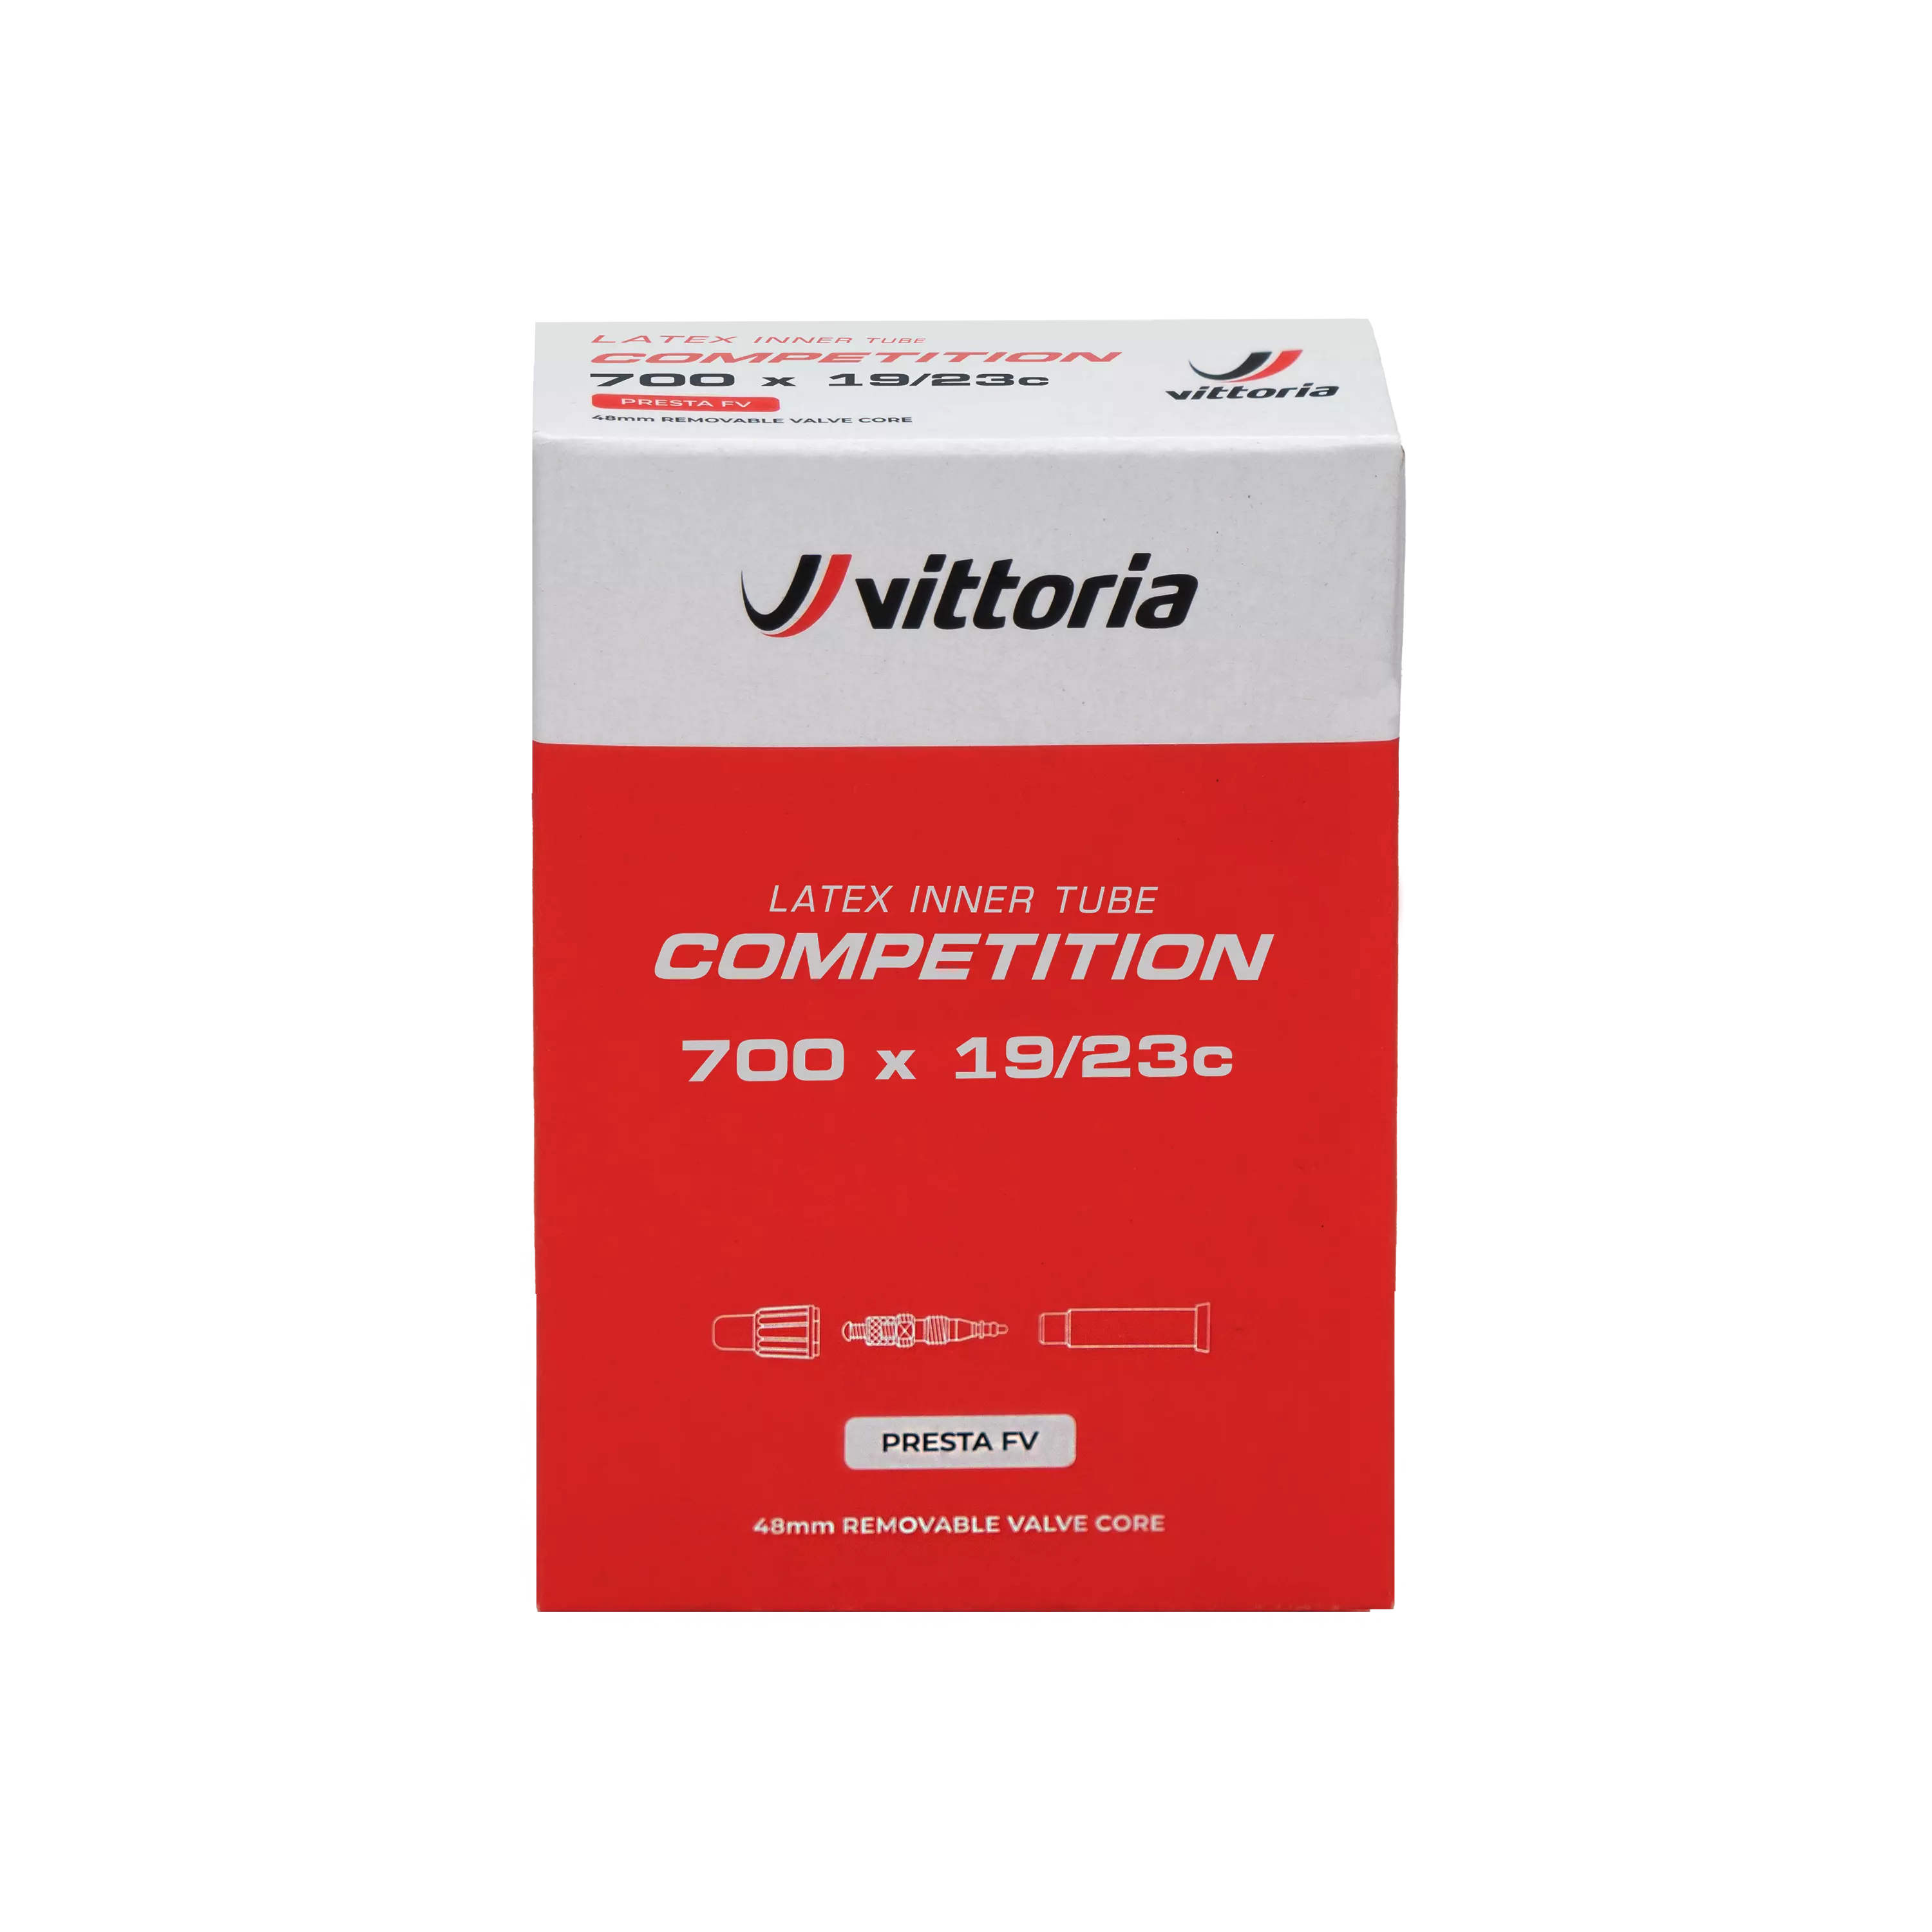 Competition Latex inner tube